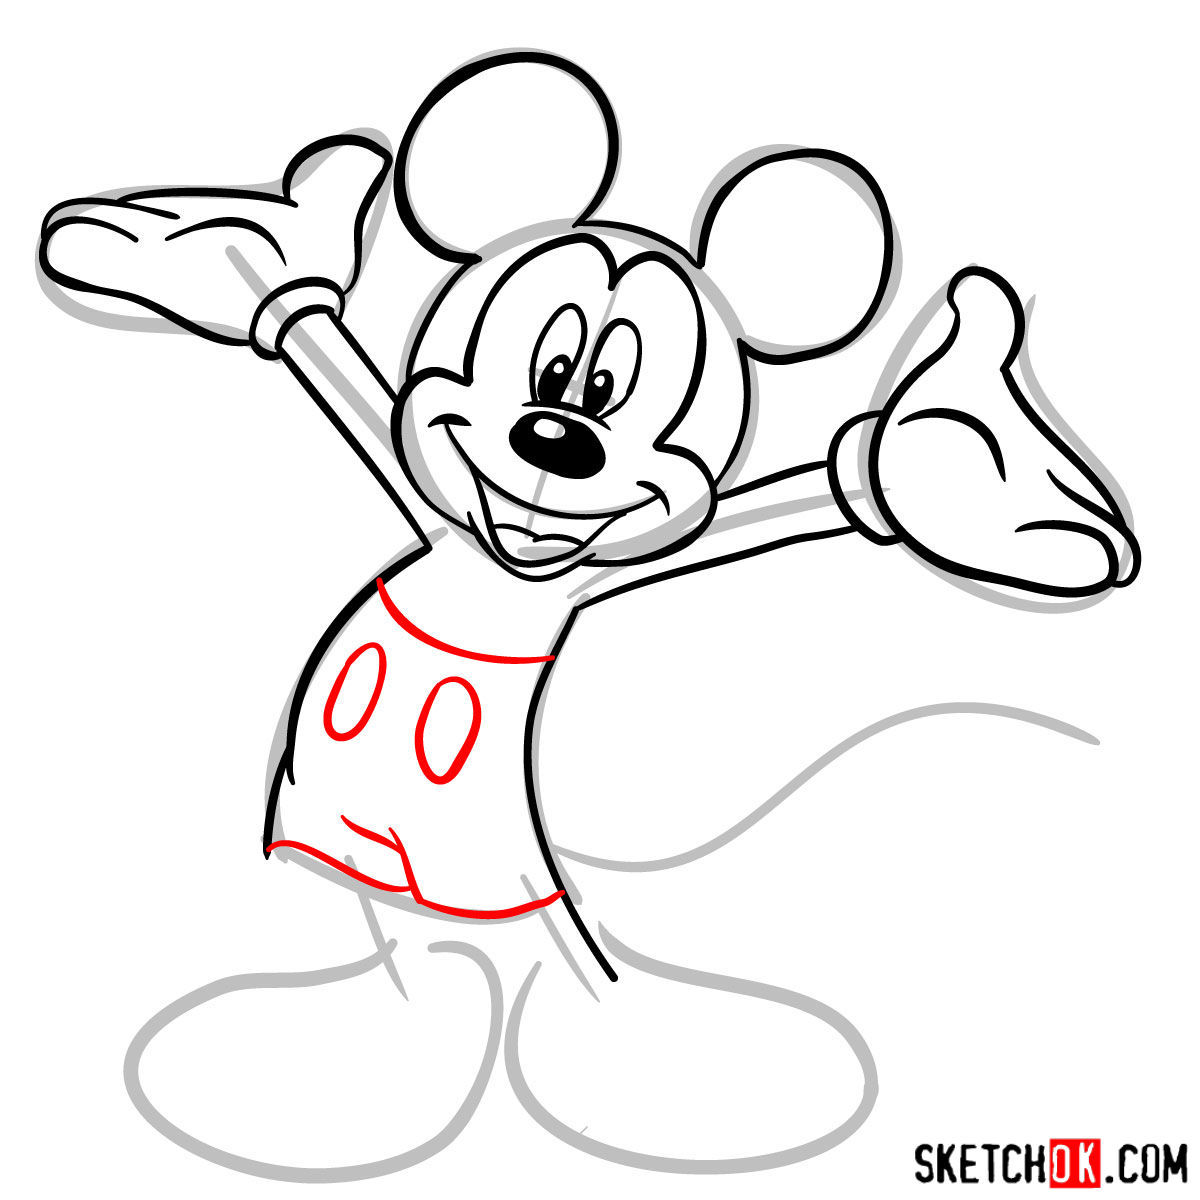 How To Draw Mickey Mouse For Beginners, Step by Step, Drawing Guide, by  Dawn - DragoArt